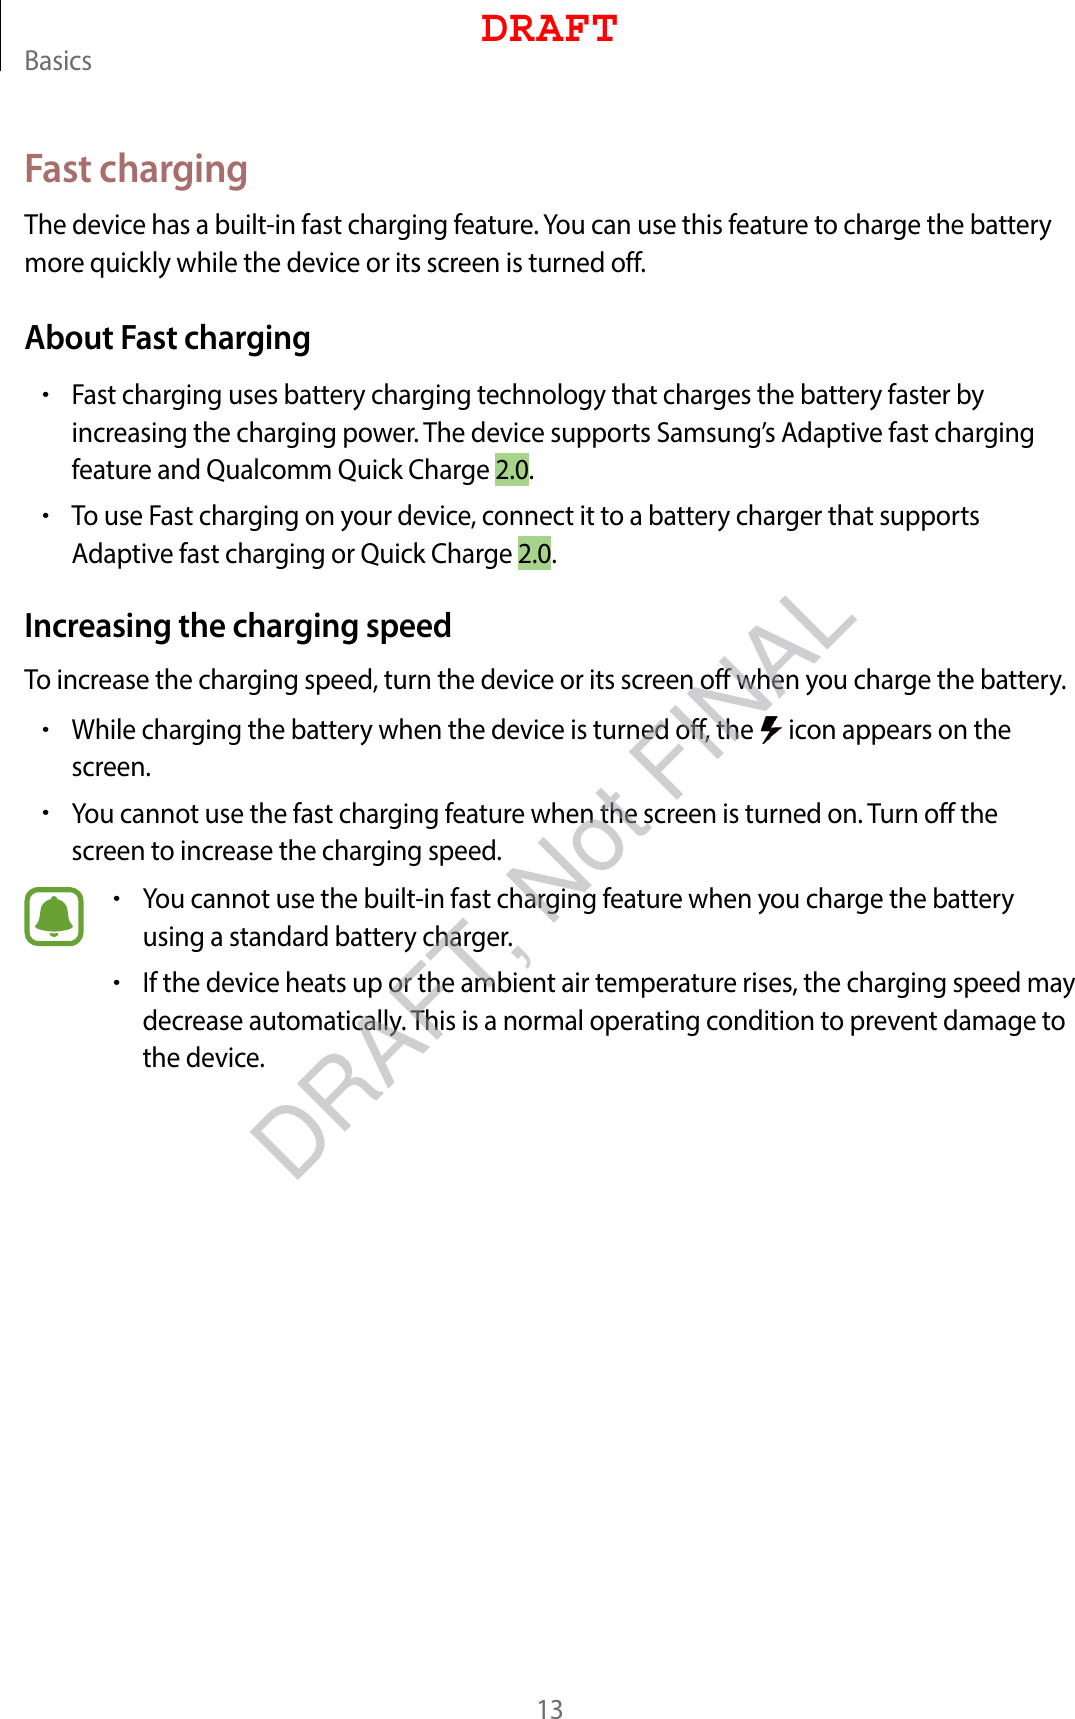 Basics13Fast chargingThe device has a built-in fast charging feature. You can use this feature to charge the battery more quickly while the device or its screen is turned off.About Fast charging•Fast charging uses battery charging technology that charges the battery faster by increasing the charging power. The device supports Samsung’s Adaptive fast charging feature and Qualcomm Quick Charge 2.0.•To use Fast charging on your device, connect it to a battery charger that supports Adaptive fast charging or Quick Charge 2.0.Increasing the charging speedTo increase the charging speed, turn the device or its screen off when you charge the battery.•While charging the battery when the device is turned off, the   icon appears on the screen.•You cannot use the fast charging feature when the screen is turned on. Turn off the screen to increase the charging speed.•You cannot use the built-in fast charging feature when you charge the battery using a standard battery charger.•If the device heats up or the ambient air temperature rises, the charging speed may decrease automatically. This is a normal operating condition to prevent damage to the device.DRAFTDRAFT, Not FINAL